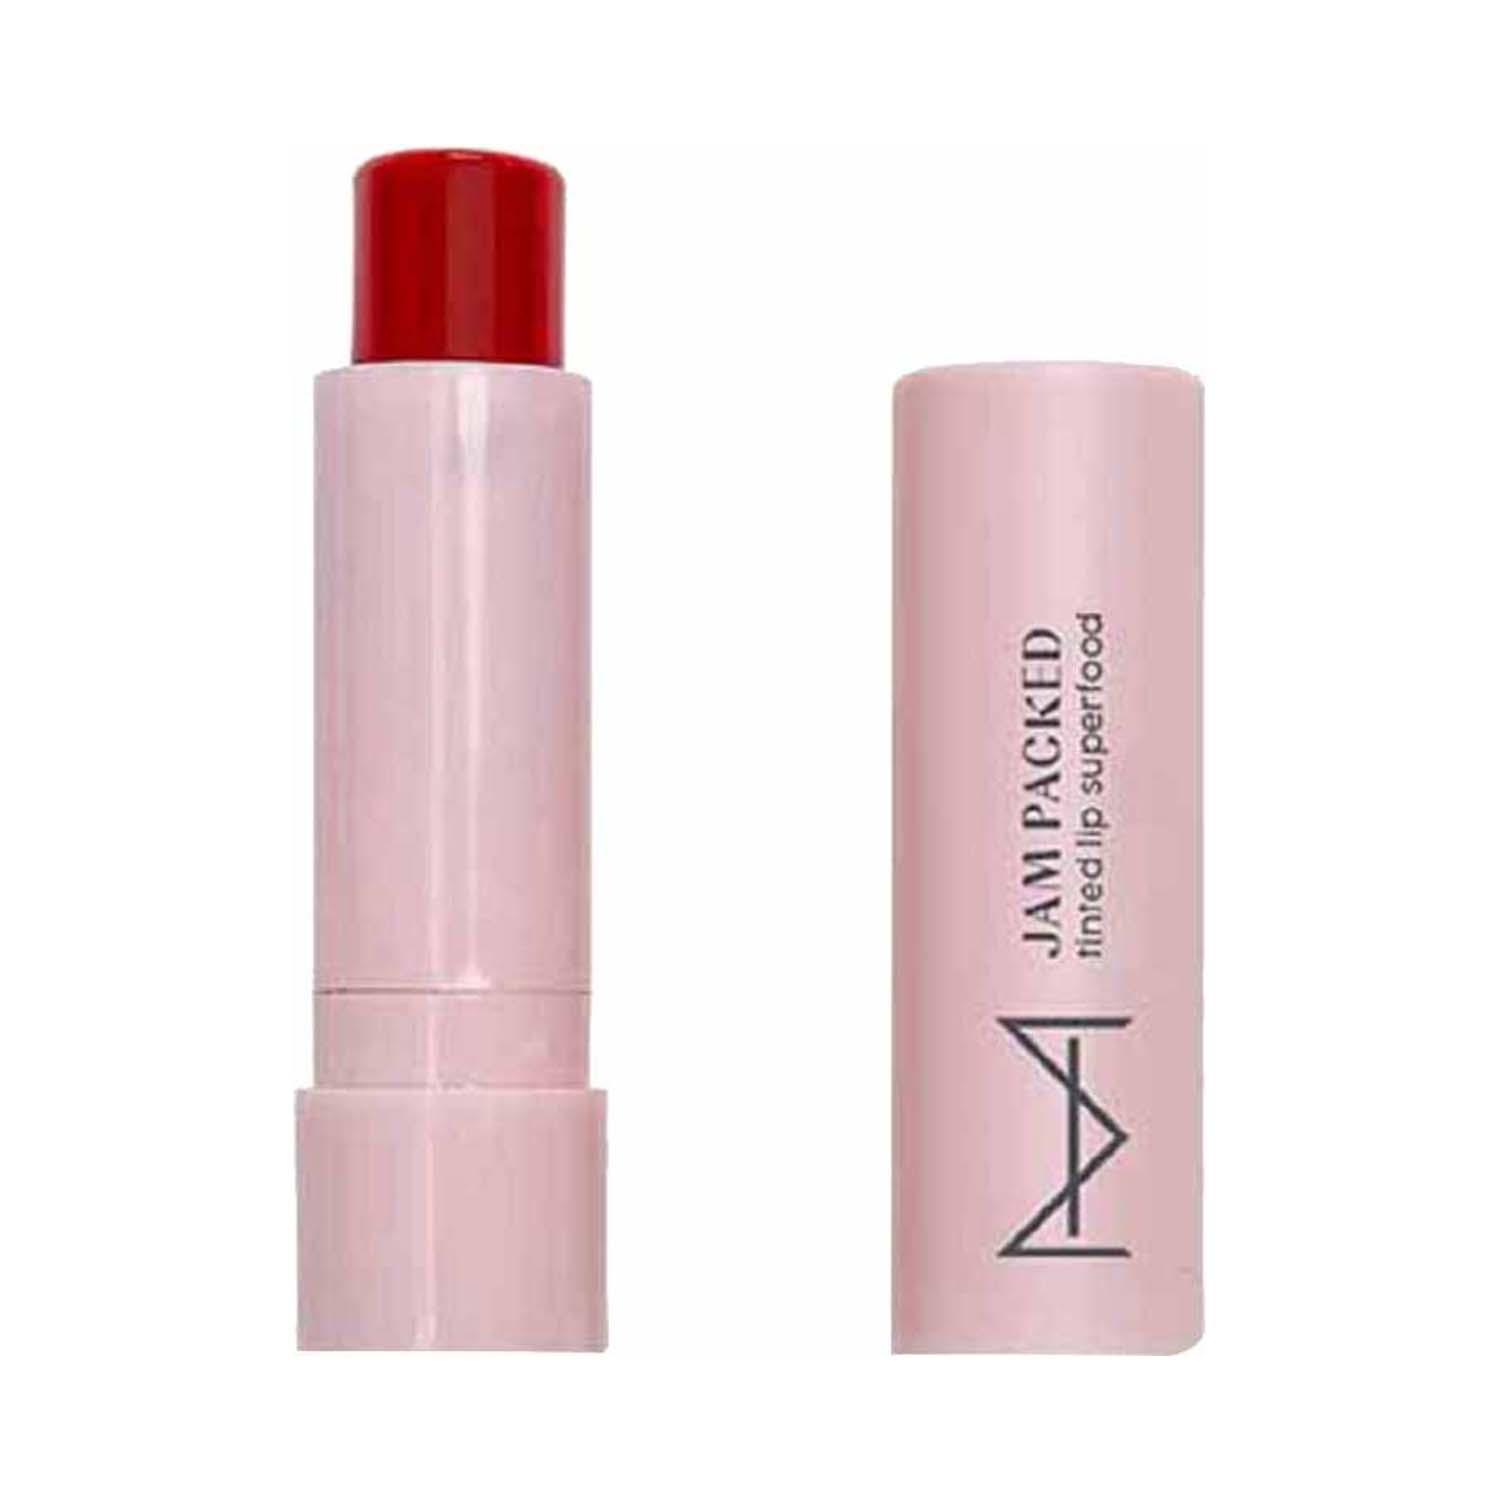 HOUSE OF MAKEUP | HOUSE OF MAKEUP Jam Packed Tinted Lip Superfood - Juicy Berry (3.8 g)